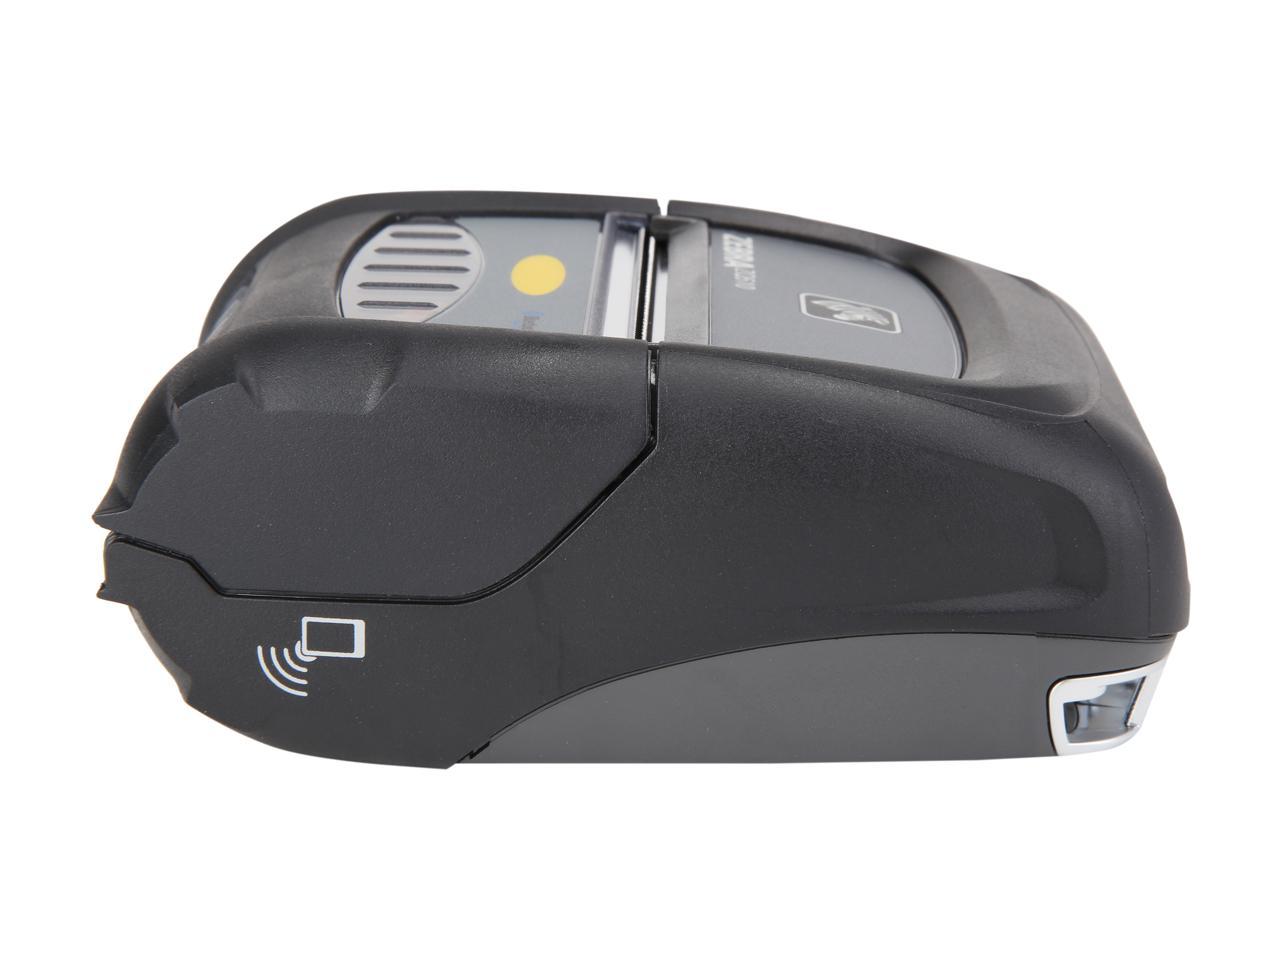 Zebra Zq510 3 Mobile Direct Thermal Receipt And Label Printer 203 Dpi Bluetooth 40 Linered 5559